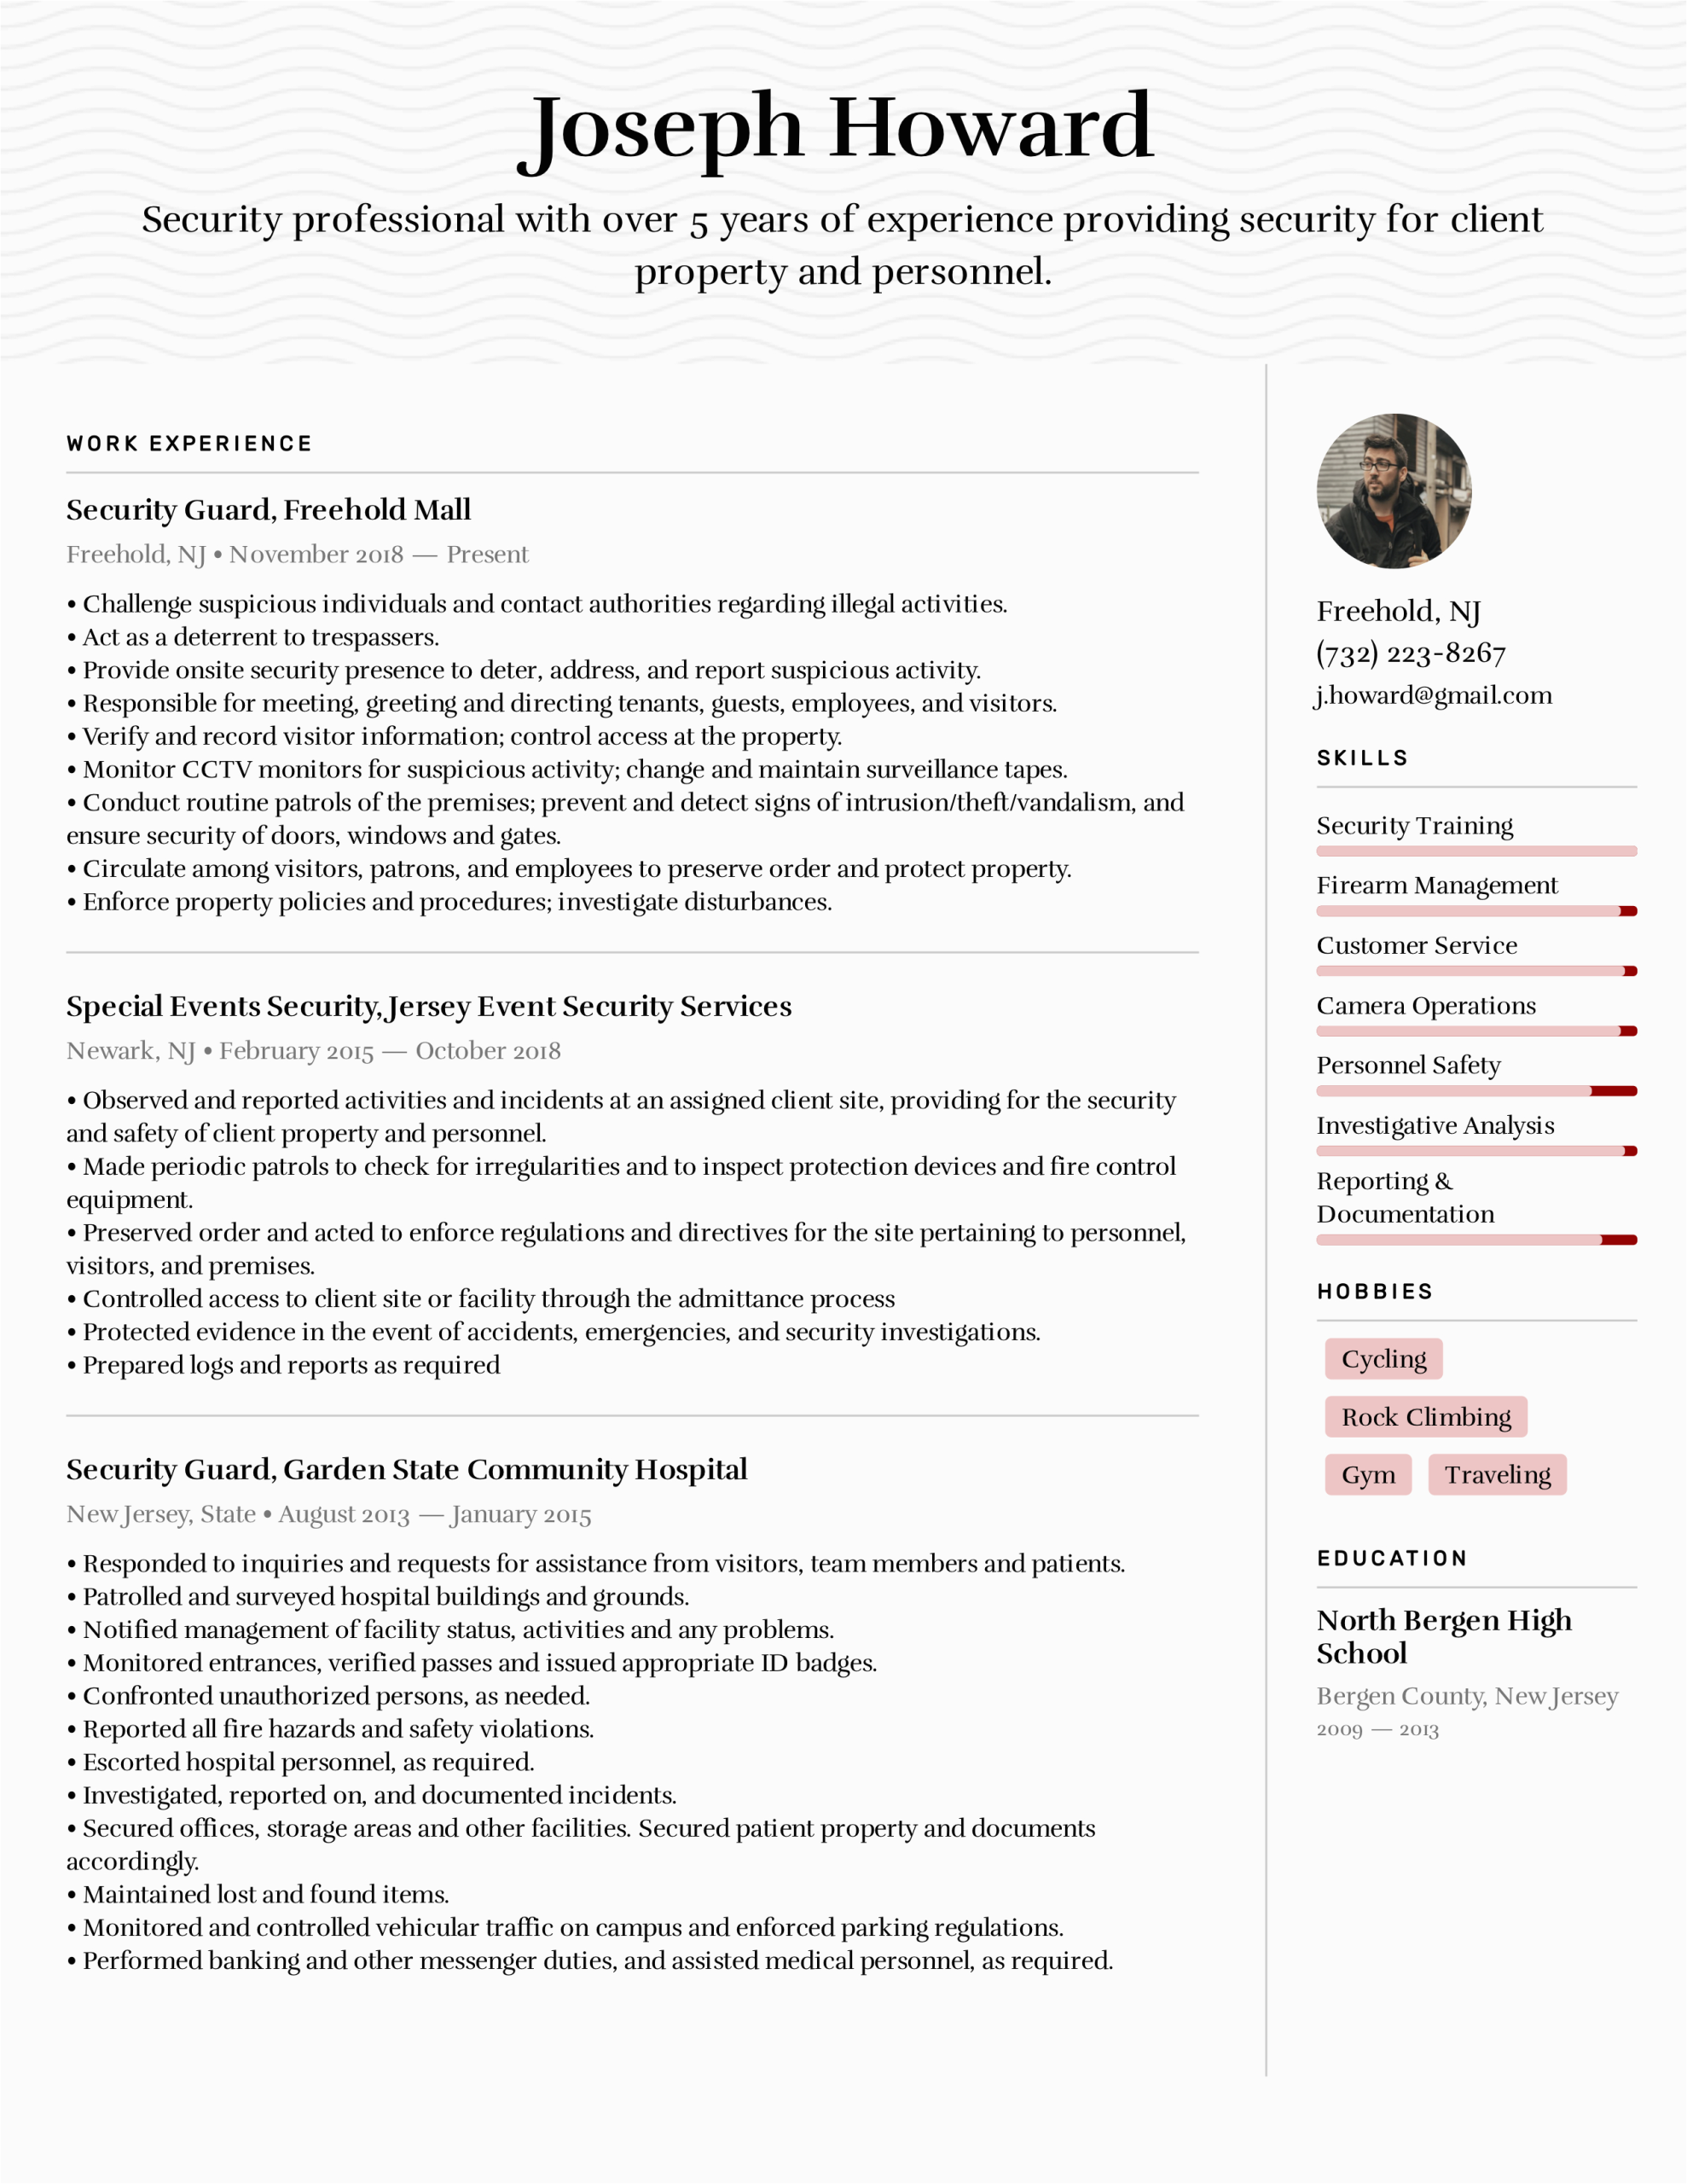 Sample Resume Objective for Security Guard Sample Security Guard Resume Objective 11 12 Resume Samples for